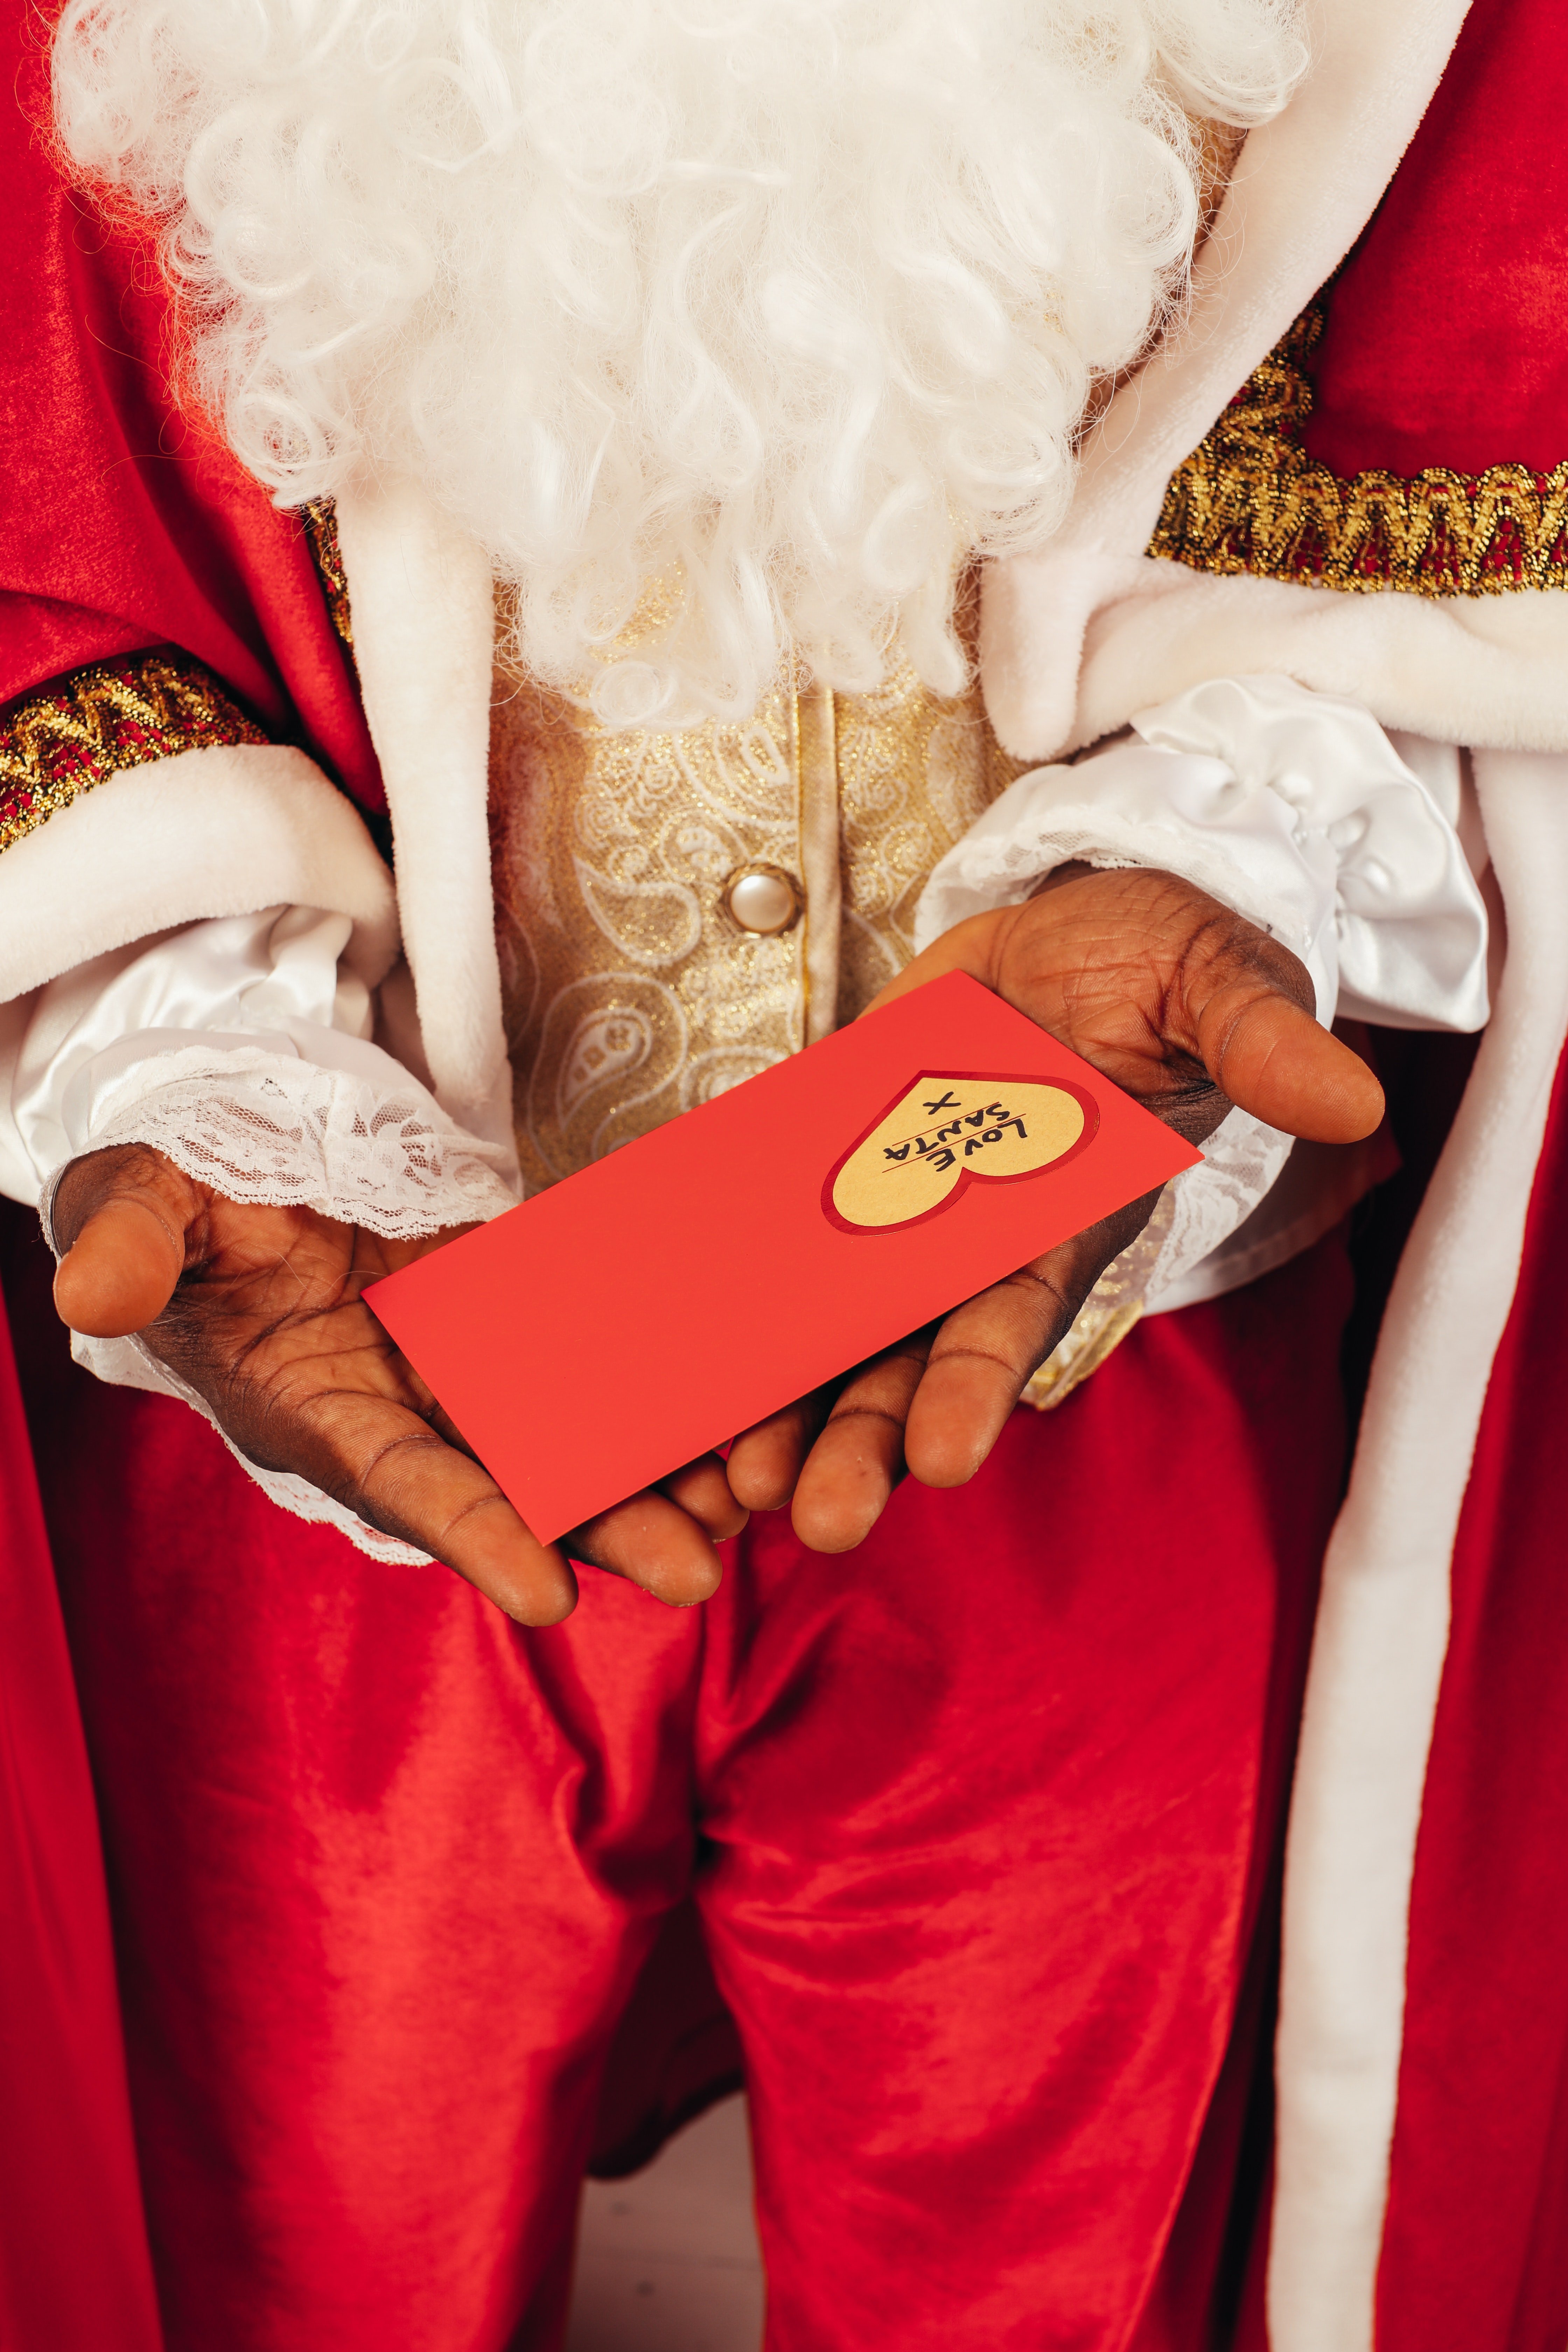 Santa urged Phillip never to lose hope and handed him a letter | Source: Pexels